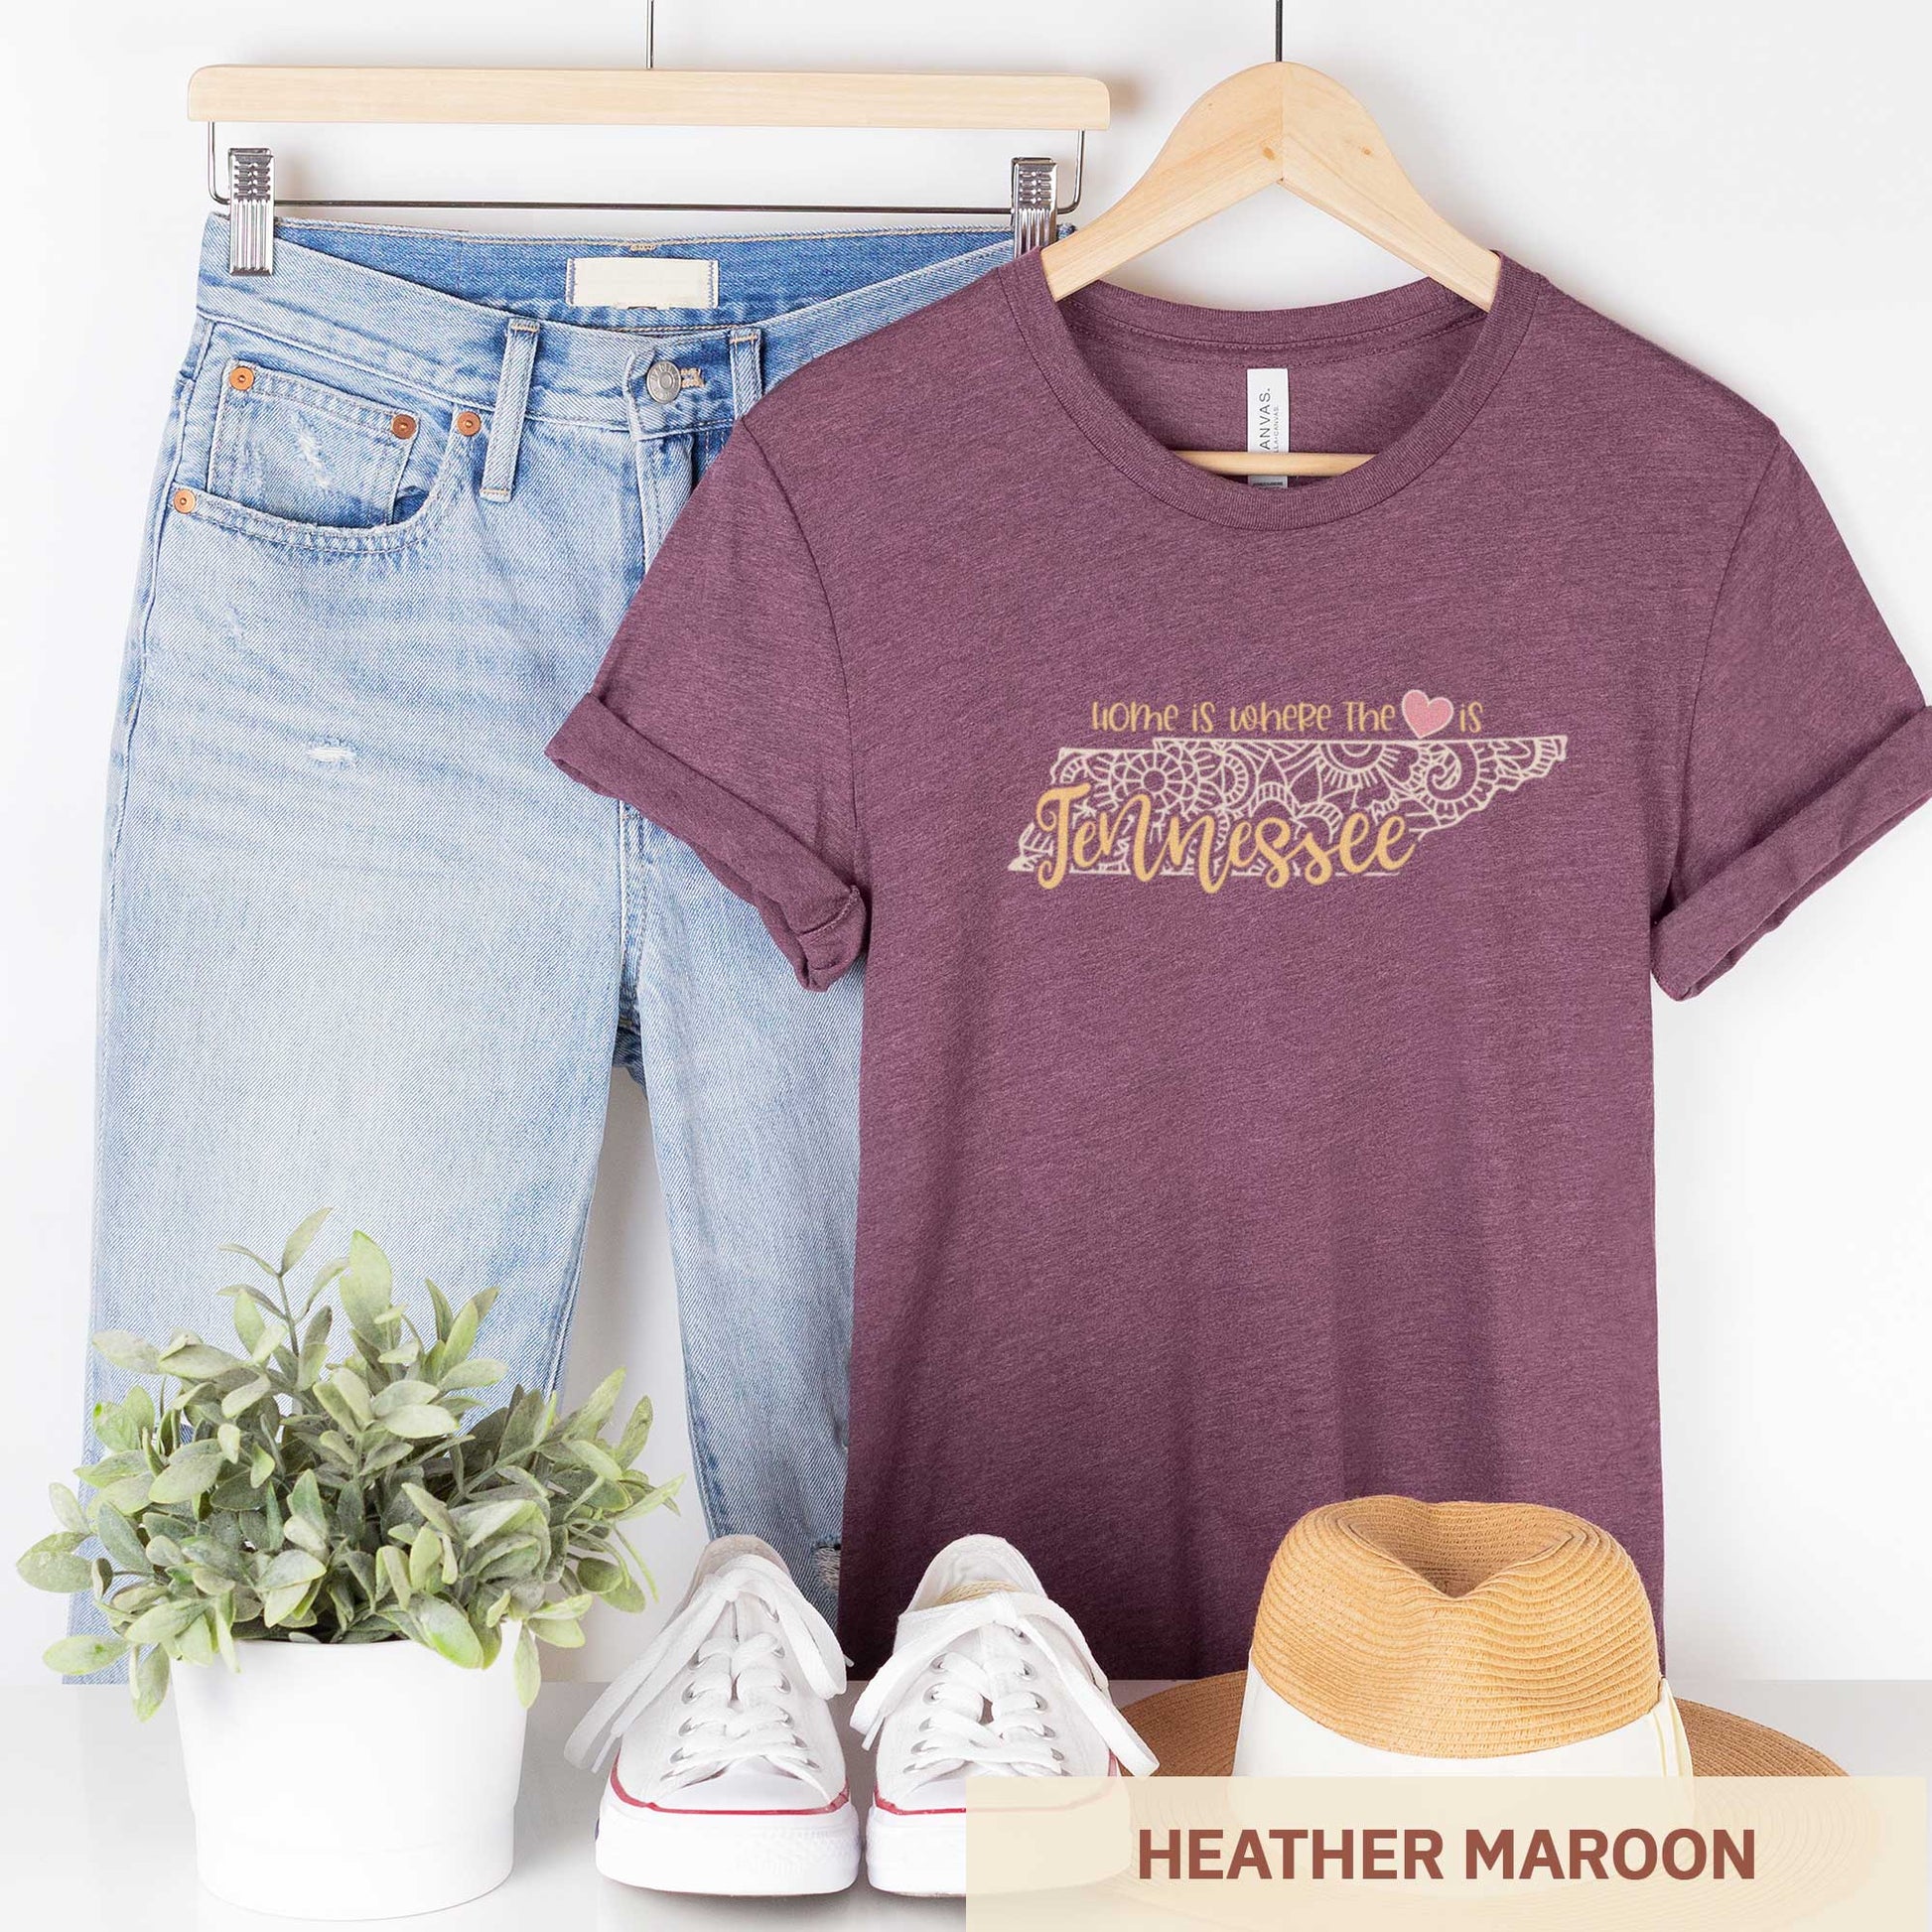 A hanging heather maroon Bella Canvas t-shirt featuring a mandala in the shape of Tennessee with the words home is where the heart is.